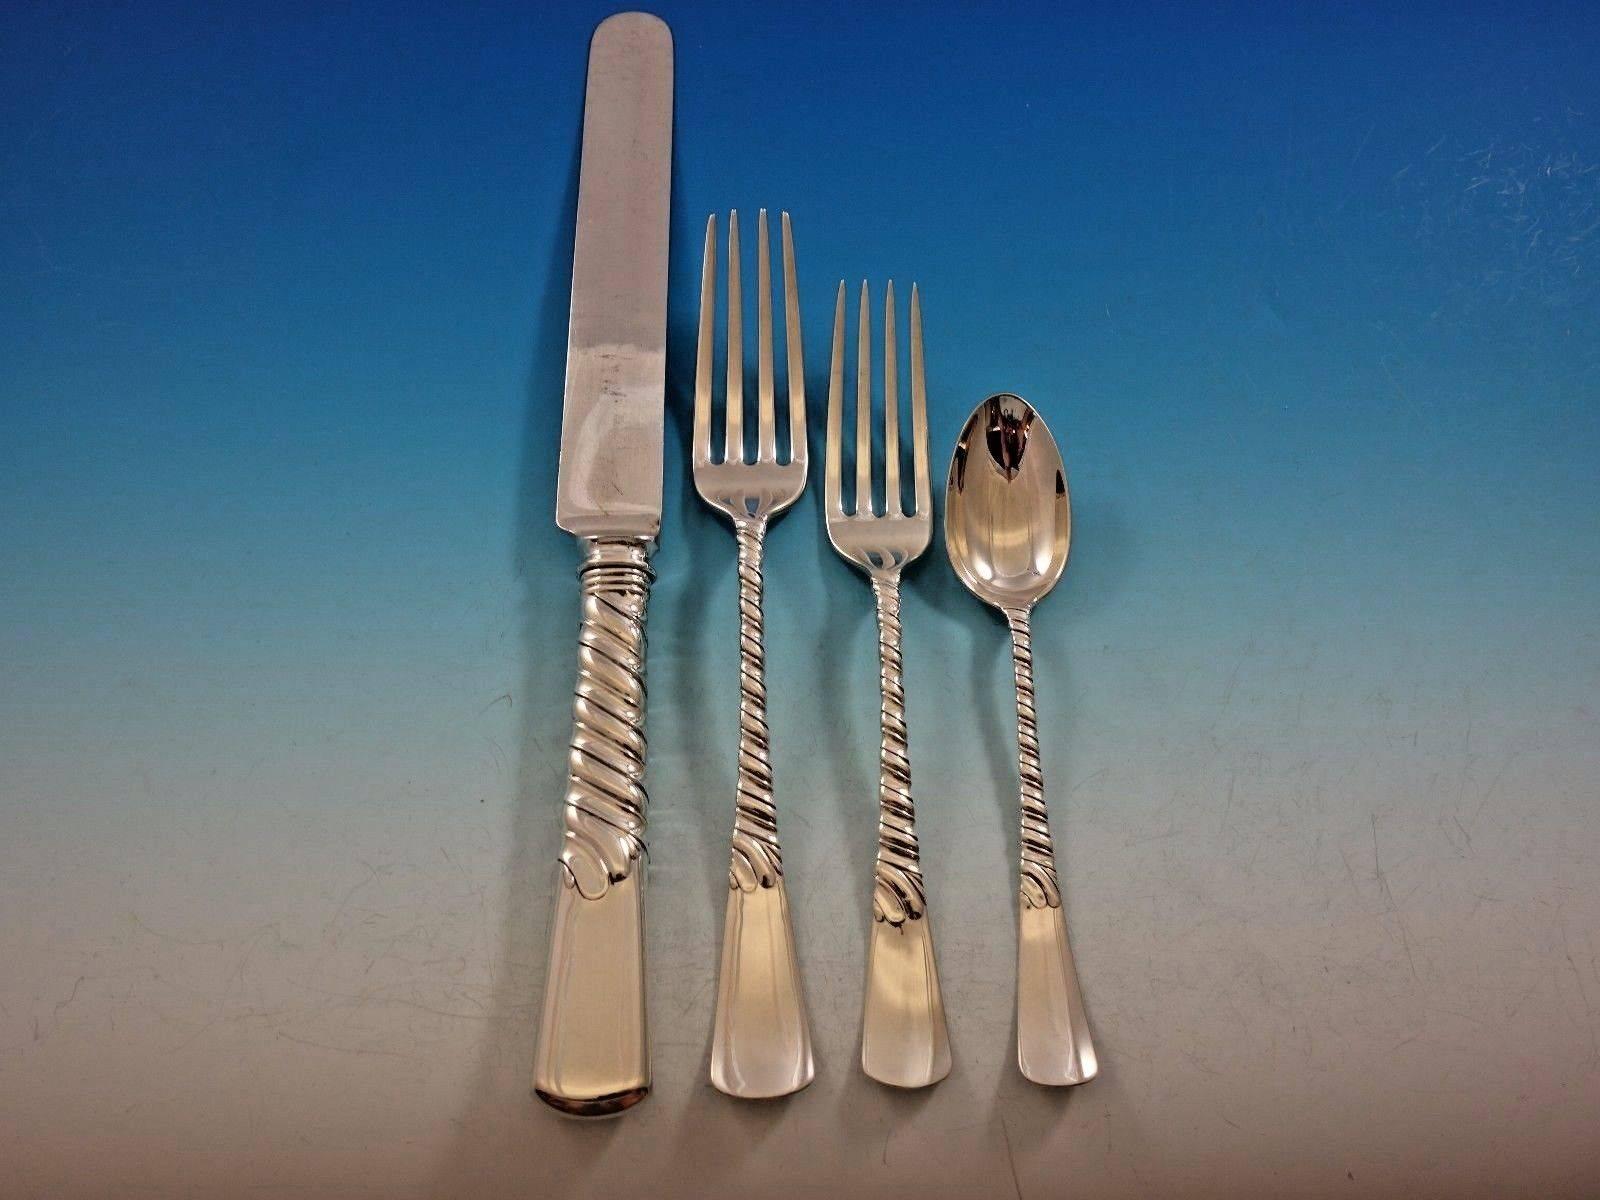 Colonial by Gorham dinner and luncheon size sterling silver flatware set, 107 pieces. This set includes: 12 banquet knives, 10 1/2